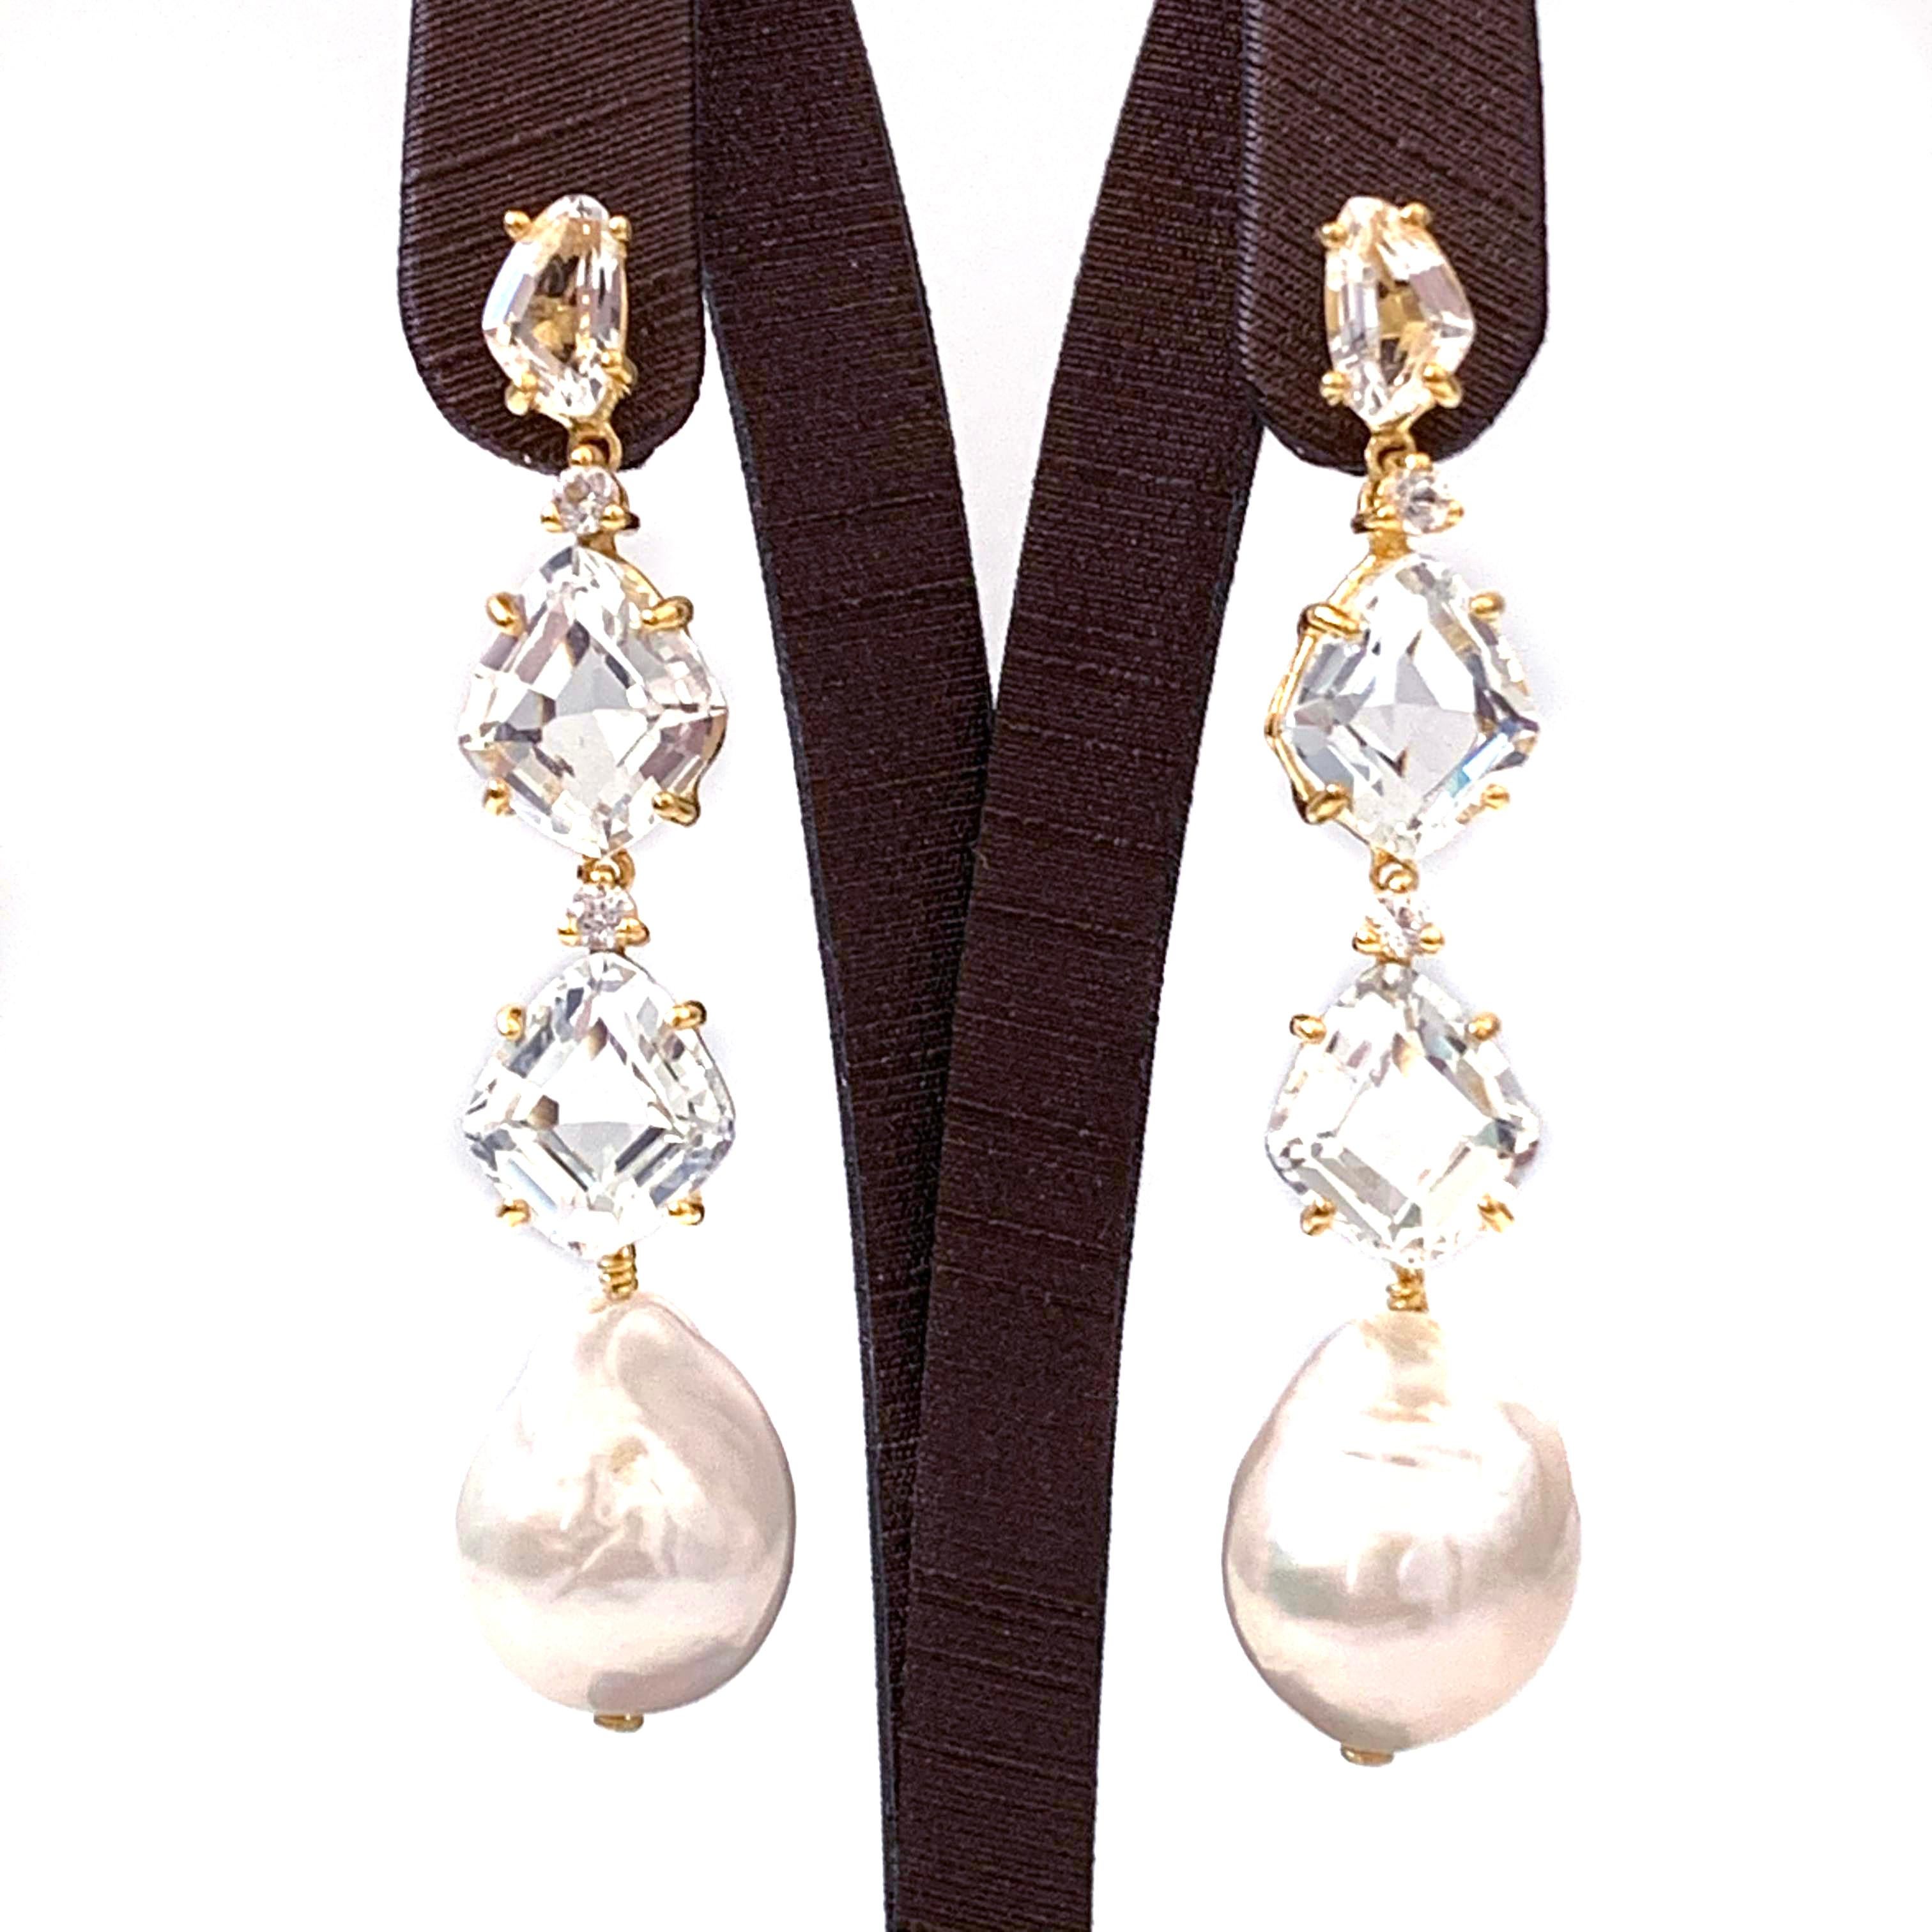 Bijoux Num White Topaz and Baroque Pearl Elongate Dangle Earrings

These earrings feature genuine fancy-cut white topaz, round white sapphire, and white baroque pearl drop. The baroque pearls measured 14x17mm. Handset and wire wrapped in 18k gold